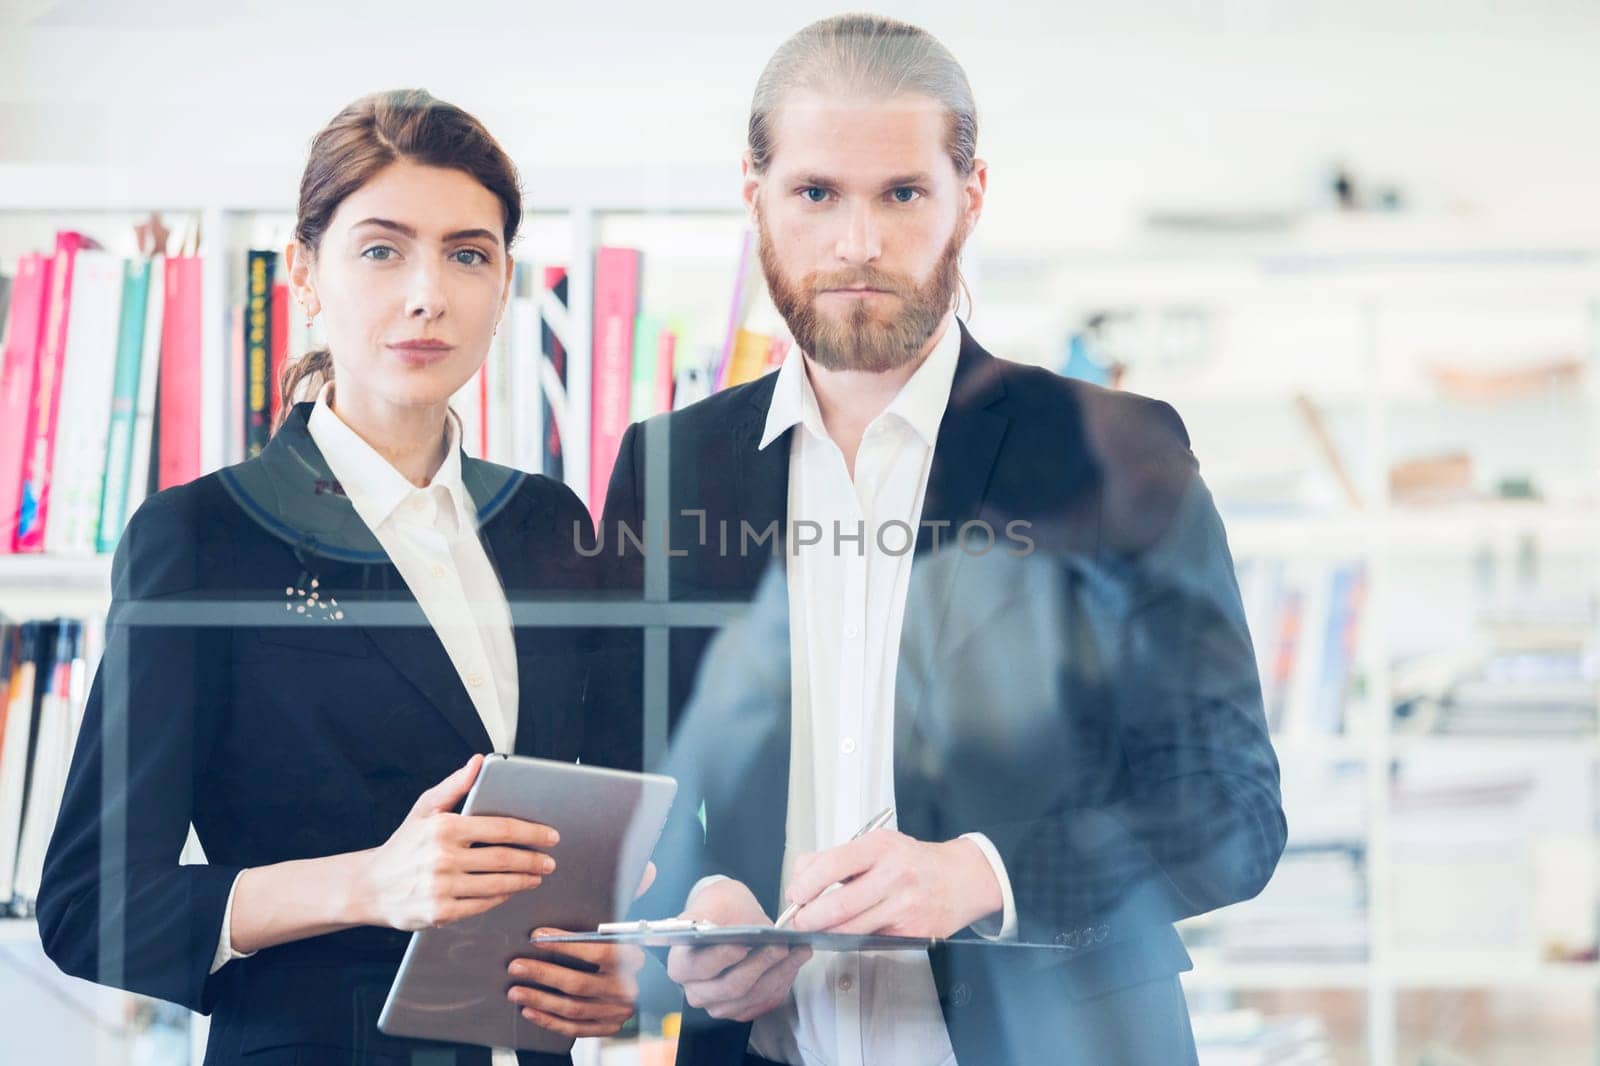 Portrait of business people with documents in office through the glass